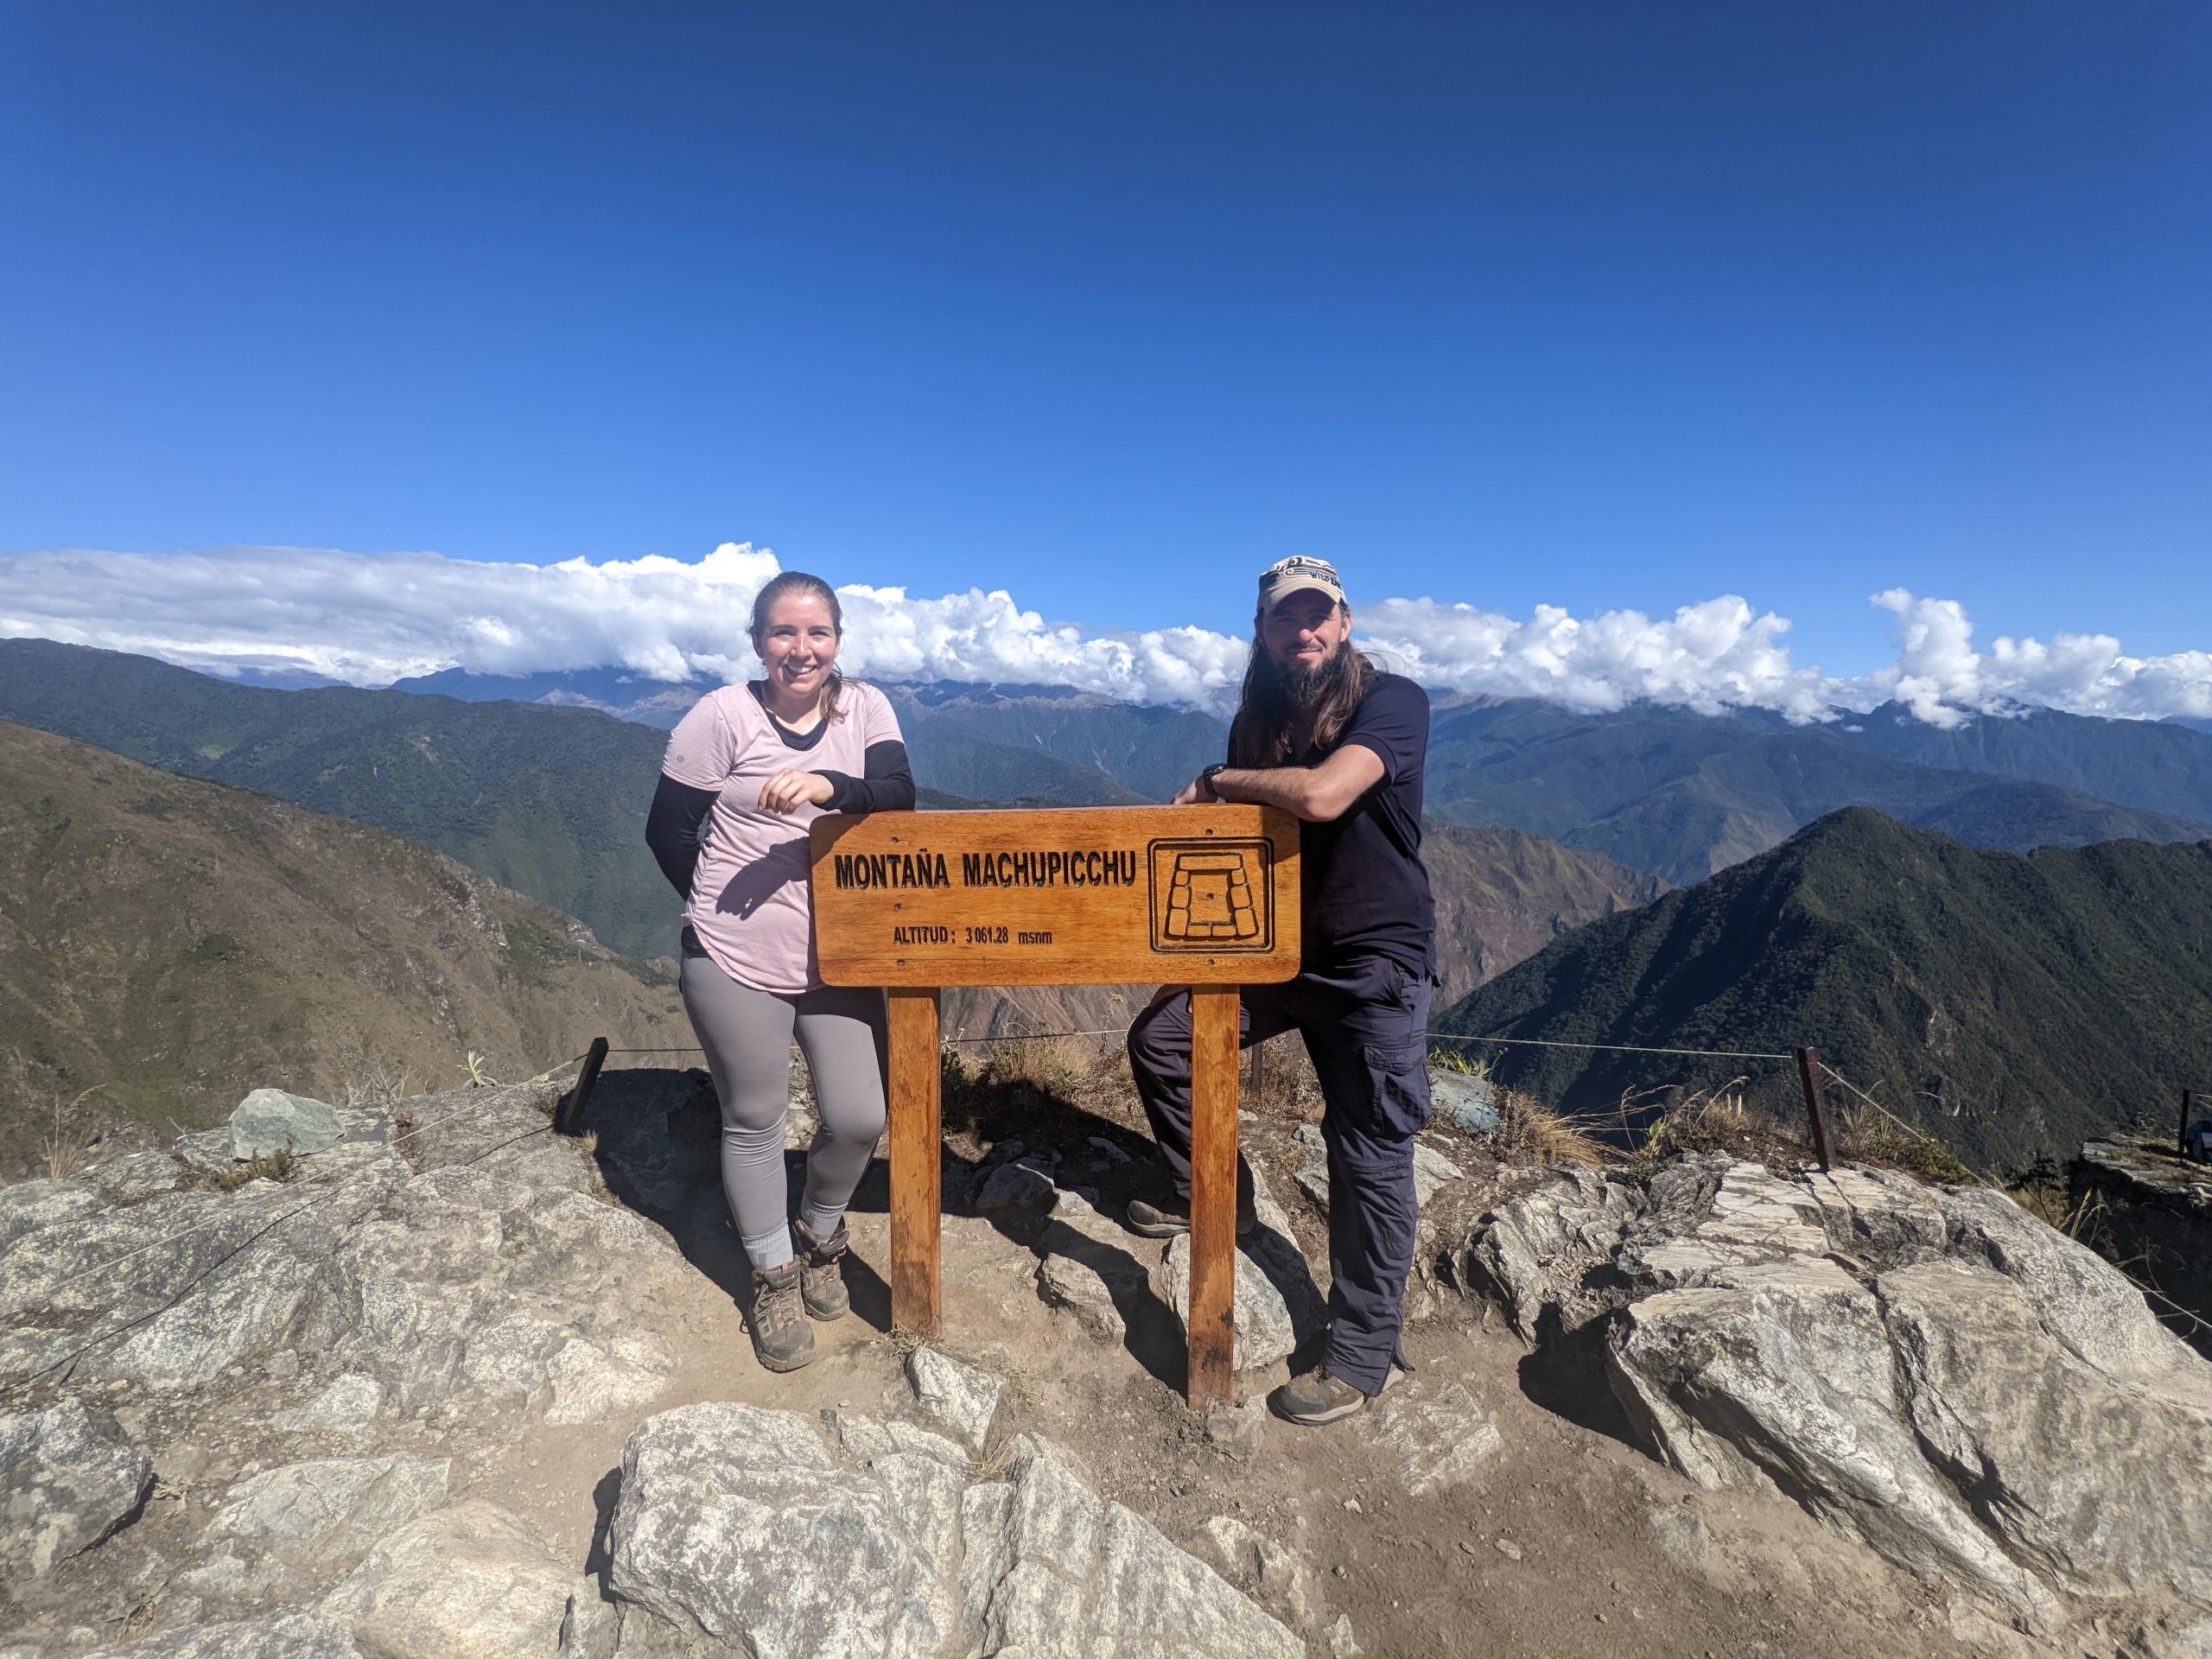 Luke and Laine stand behind the Montana Machu Picchu sign 3061.28 meters above sea level, they were walking gear and smile at the camera.